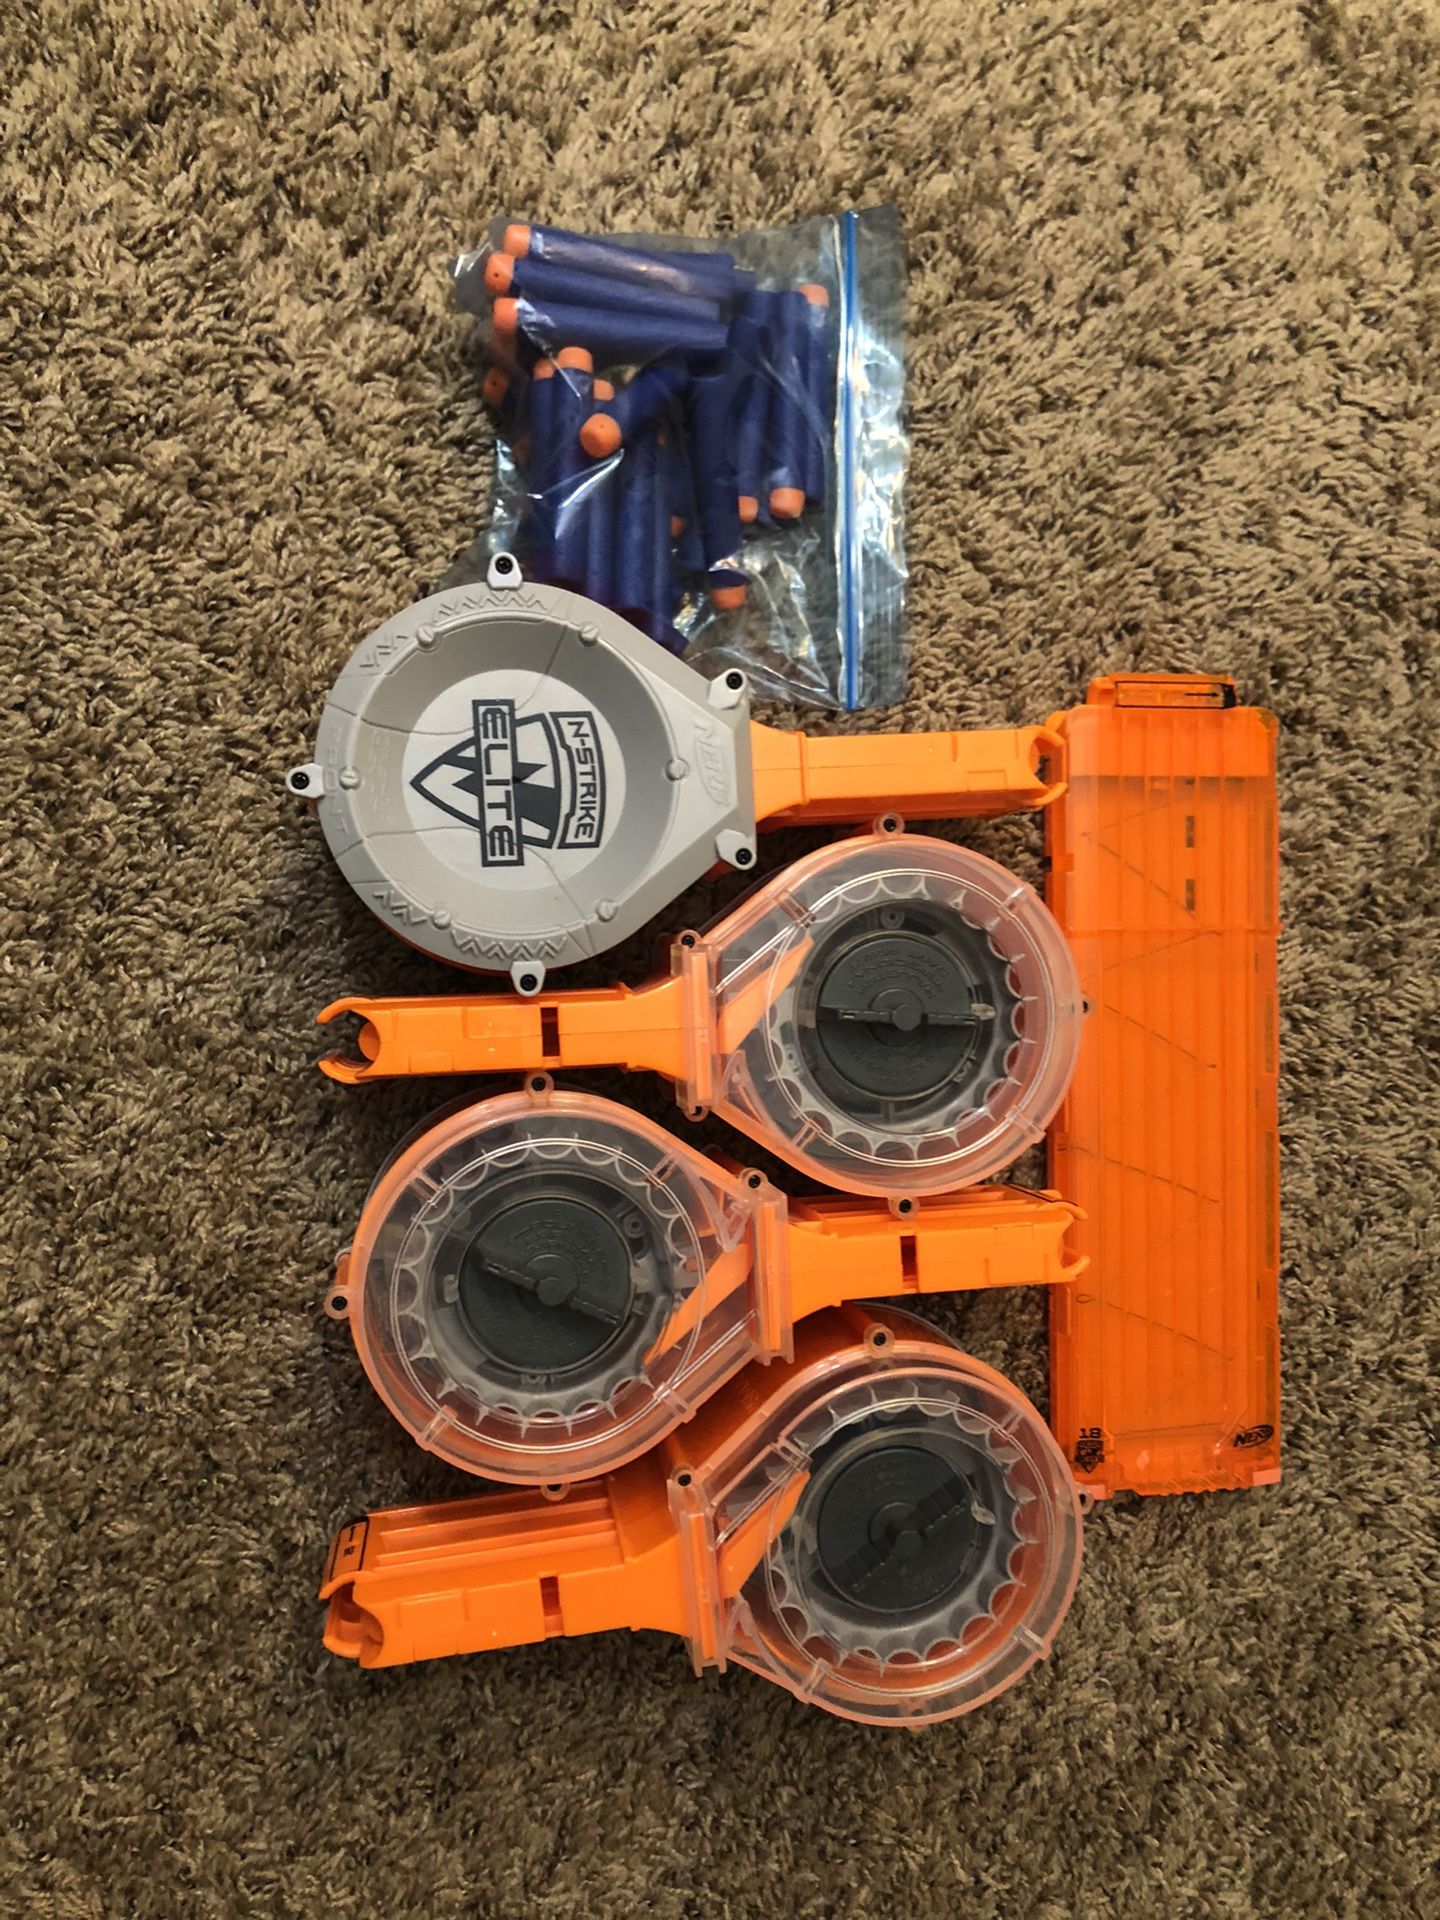 Nerf gun magazines with extra bullets